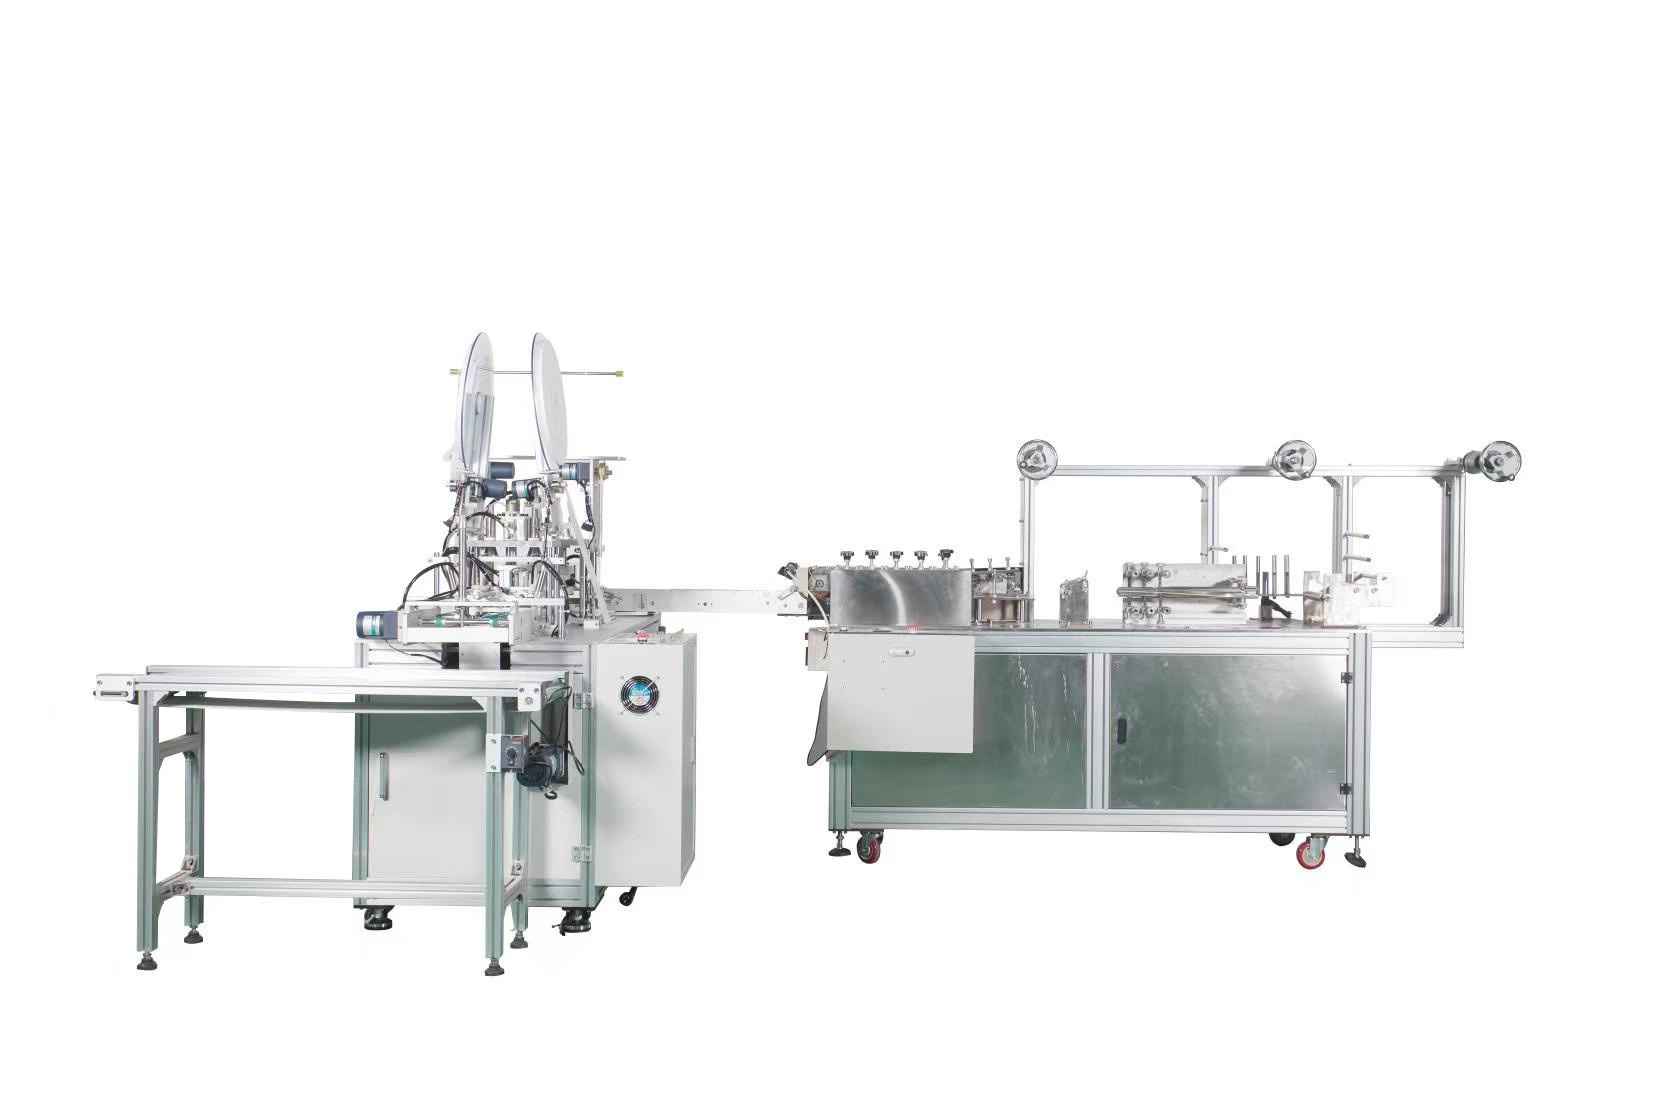 Ring Frame Textile Machinery Textile Machinery Spare Parts Disposable Face Mask Machine (Practical Type)